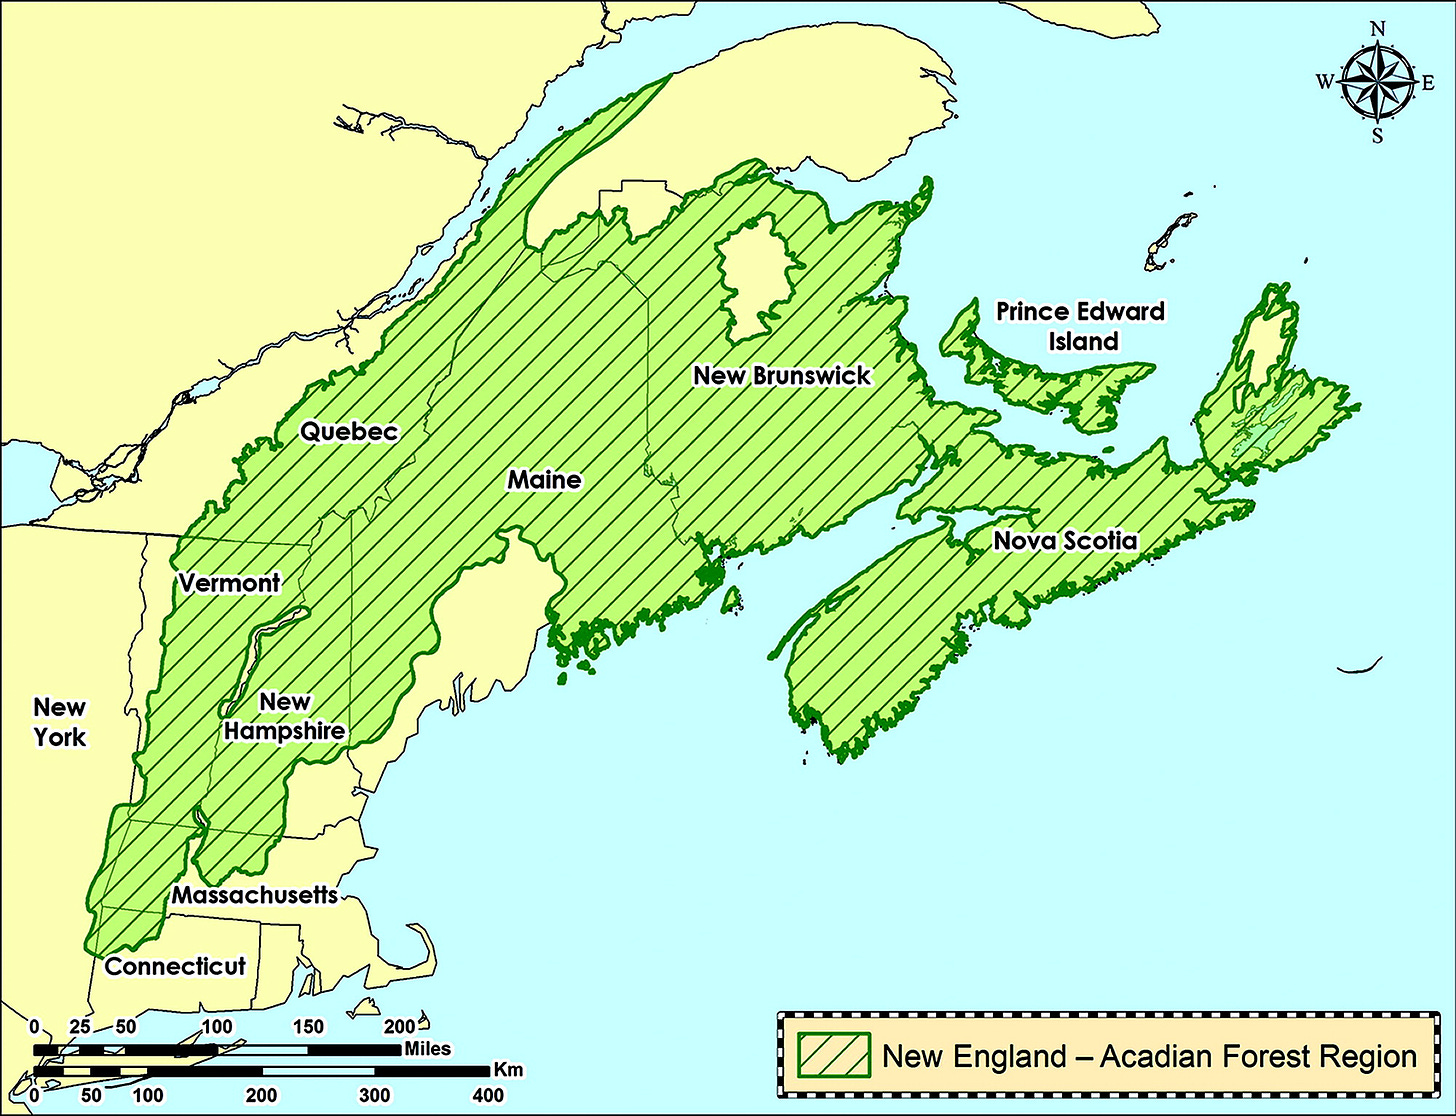 Borealization of the New England – Acadian Forest: a review of the evidence